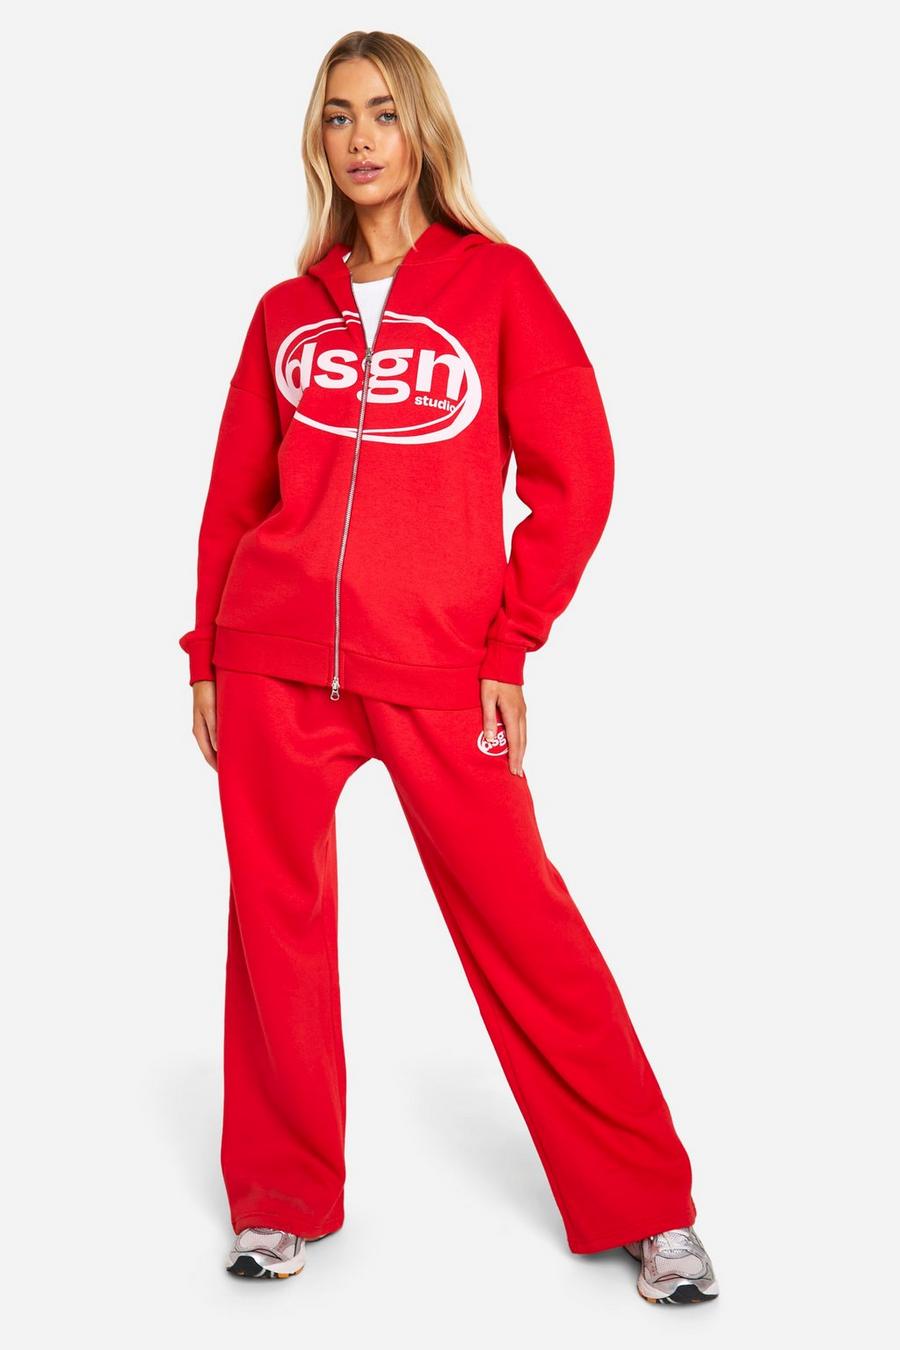 Red Dsgn Studio Oval Print Cuffed Oversized Jogger  image number 1